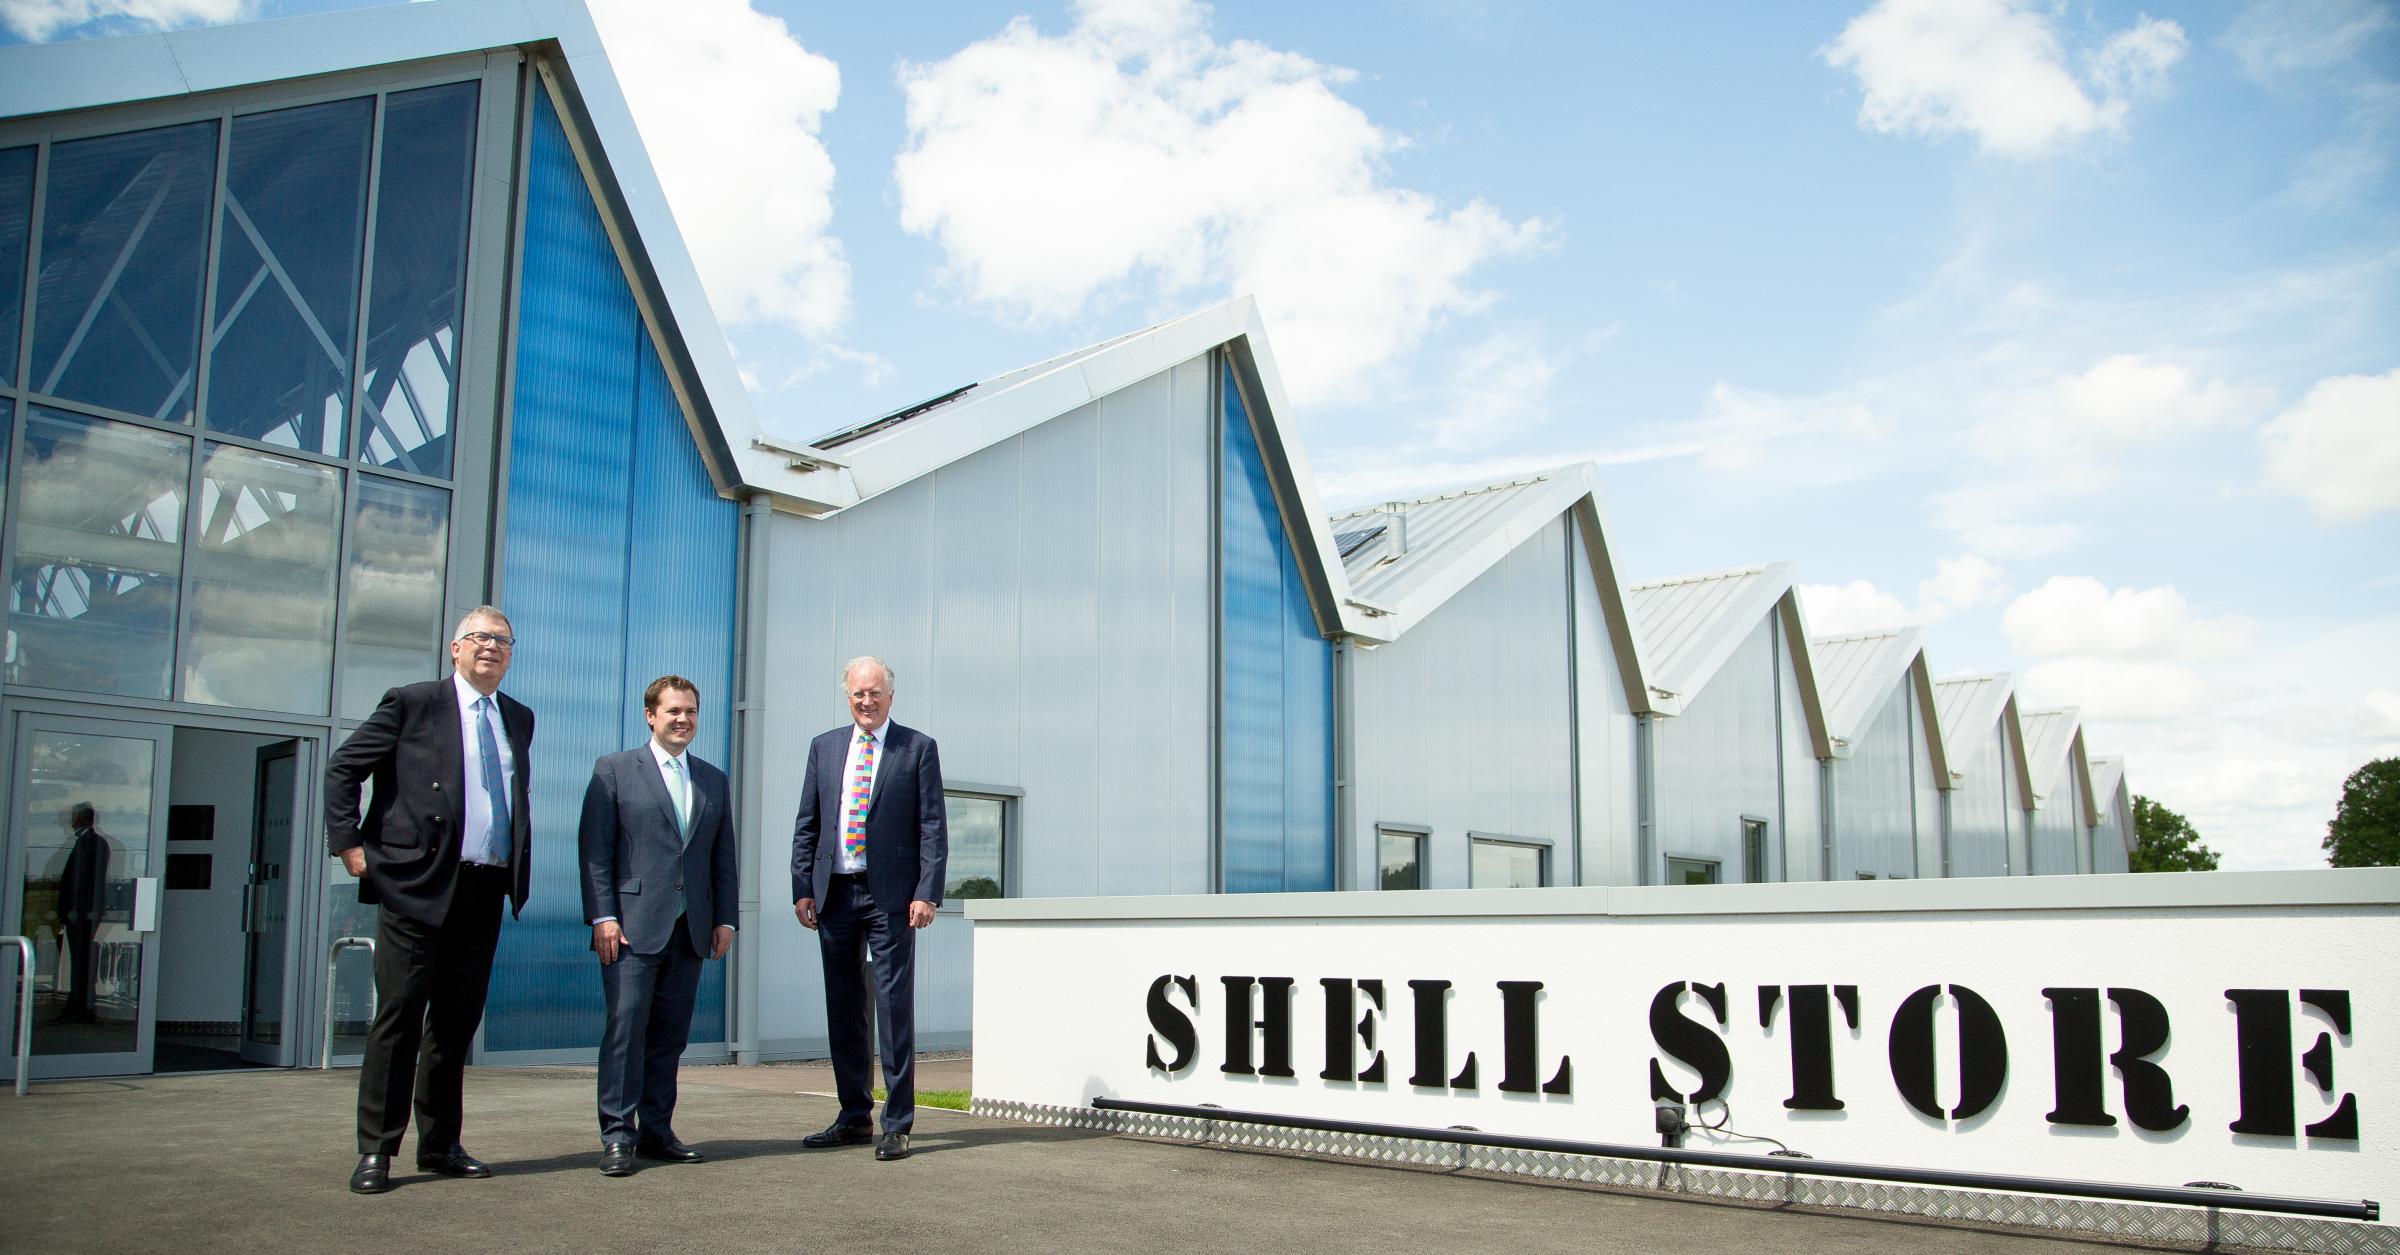 The Shell Store was opened by Robert Jenrick, the then Secretary of State for communities, housing and local government 